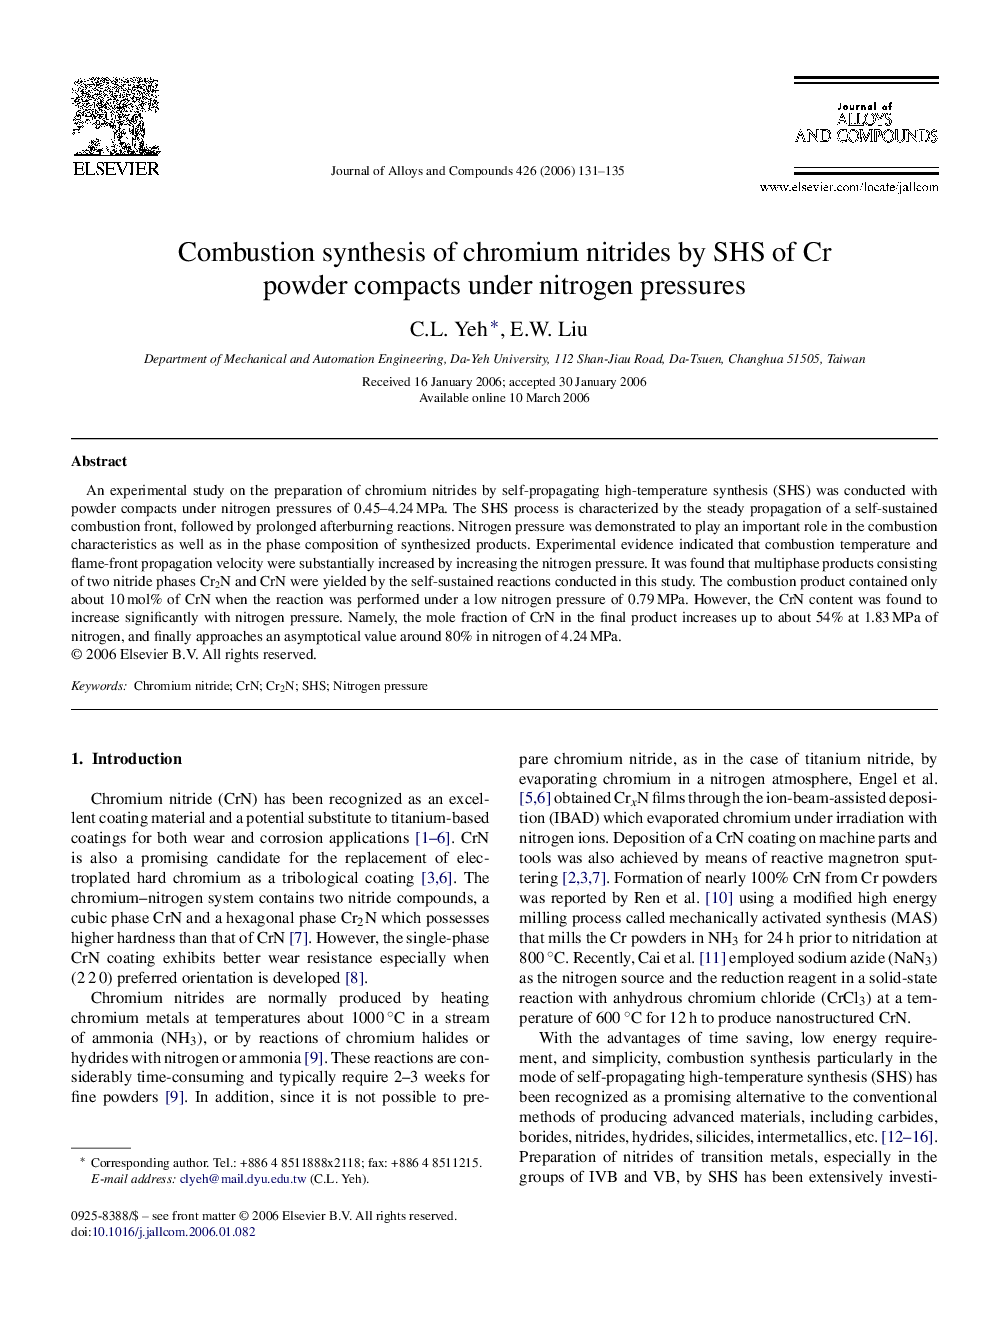 Combustion synthesis of chromium nitrides by SHS of Cr powder compacts under nitrogen pressures